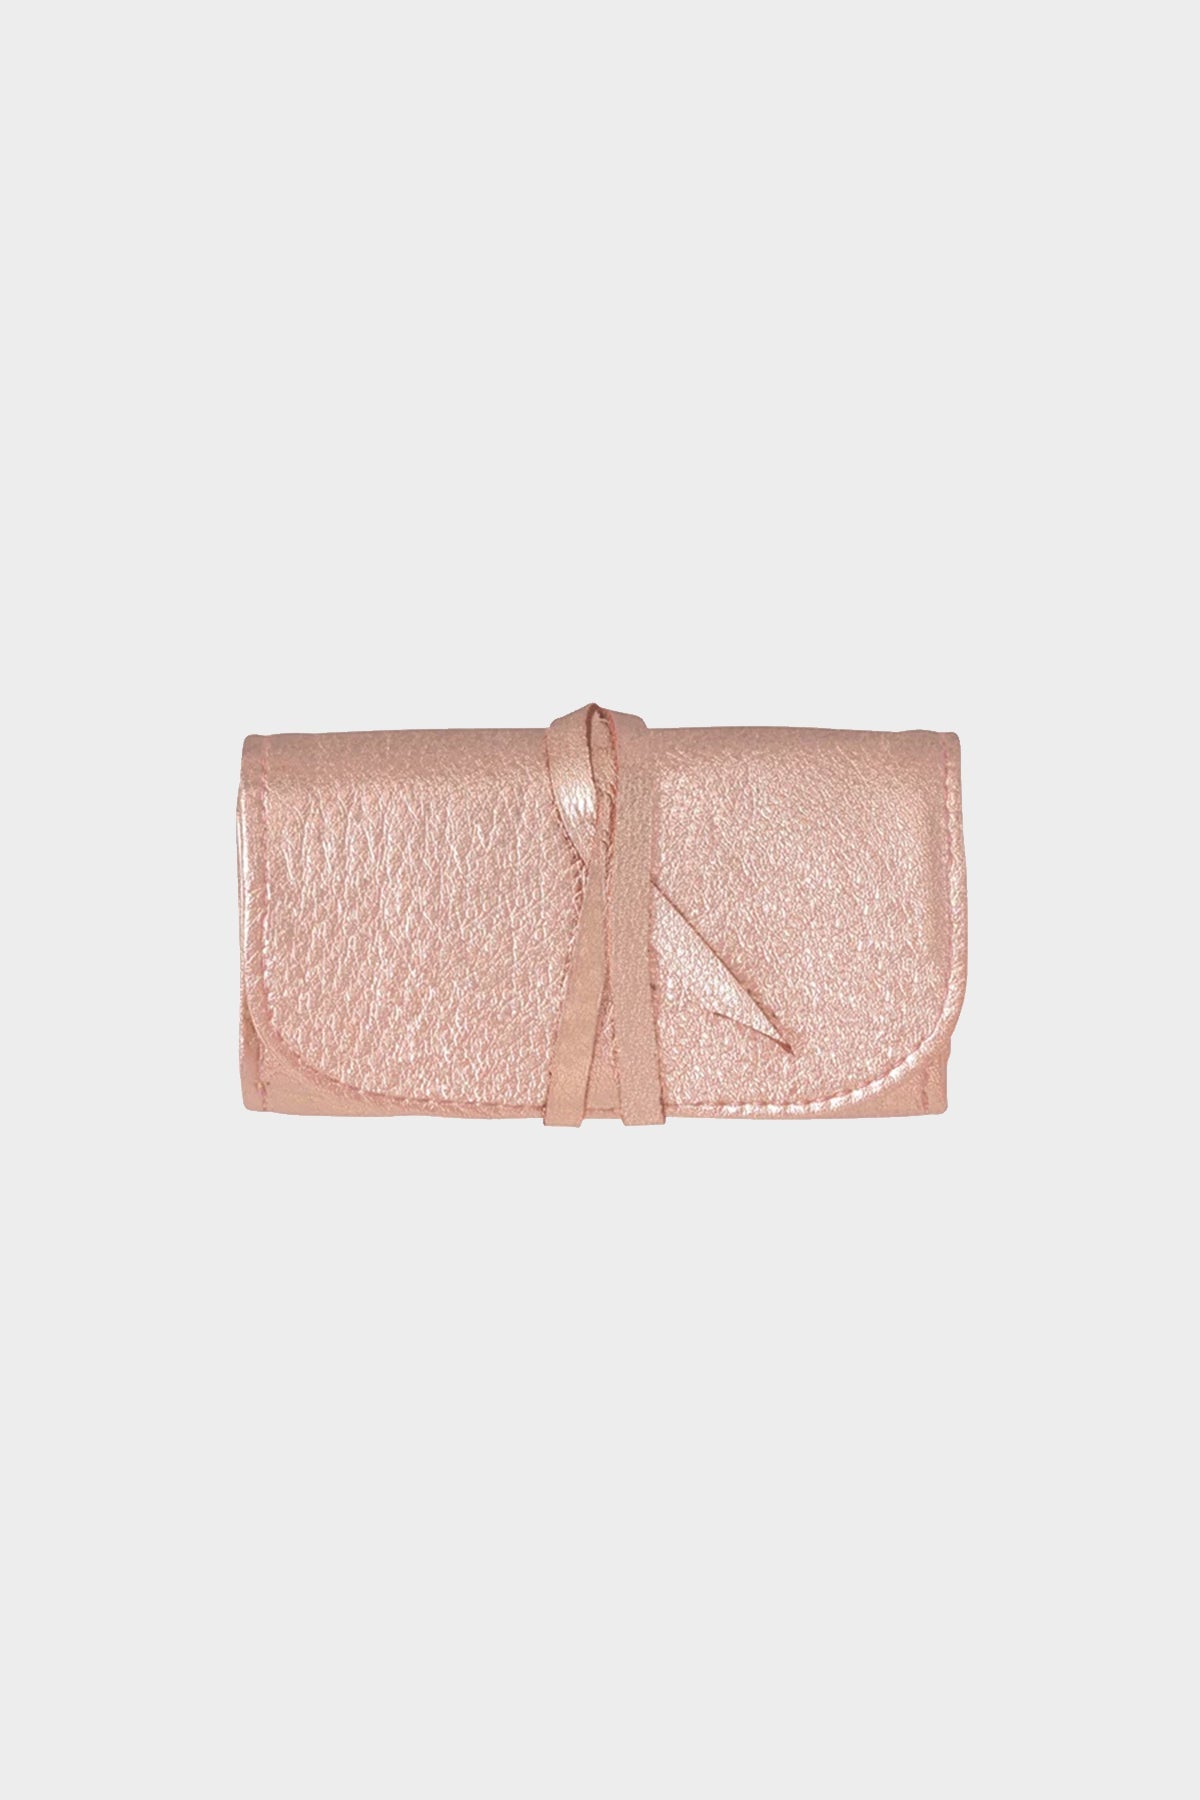 Small Jewelry Roll in Rose Gold - shop-olivia.com